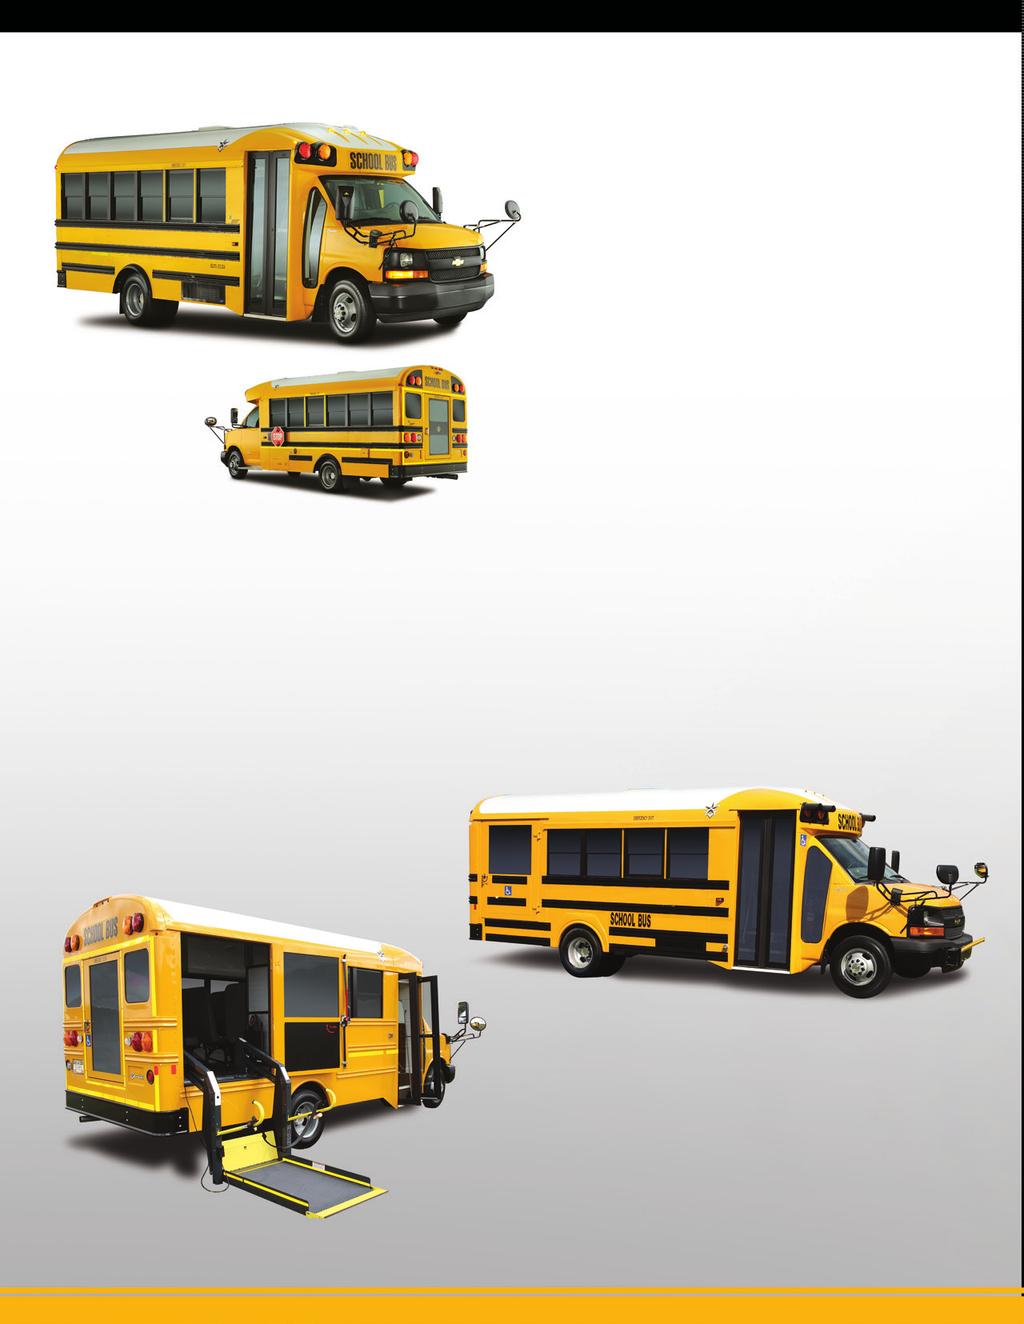 SST Series The SST is the first Type A school bus to offer improved aerodynamic styling while still providing unmatched strength and durability.